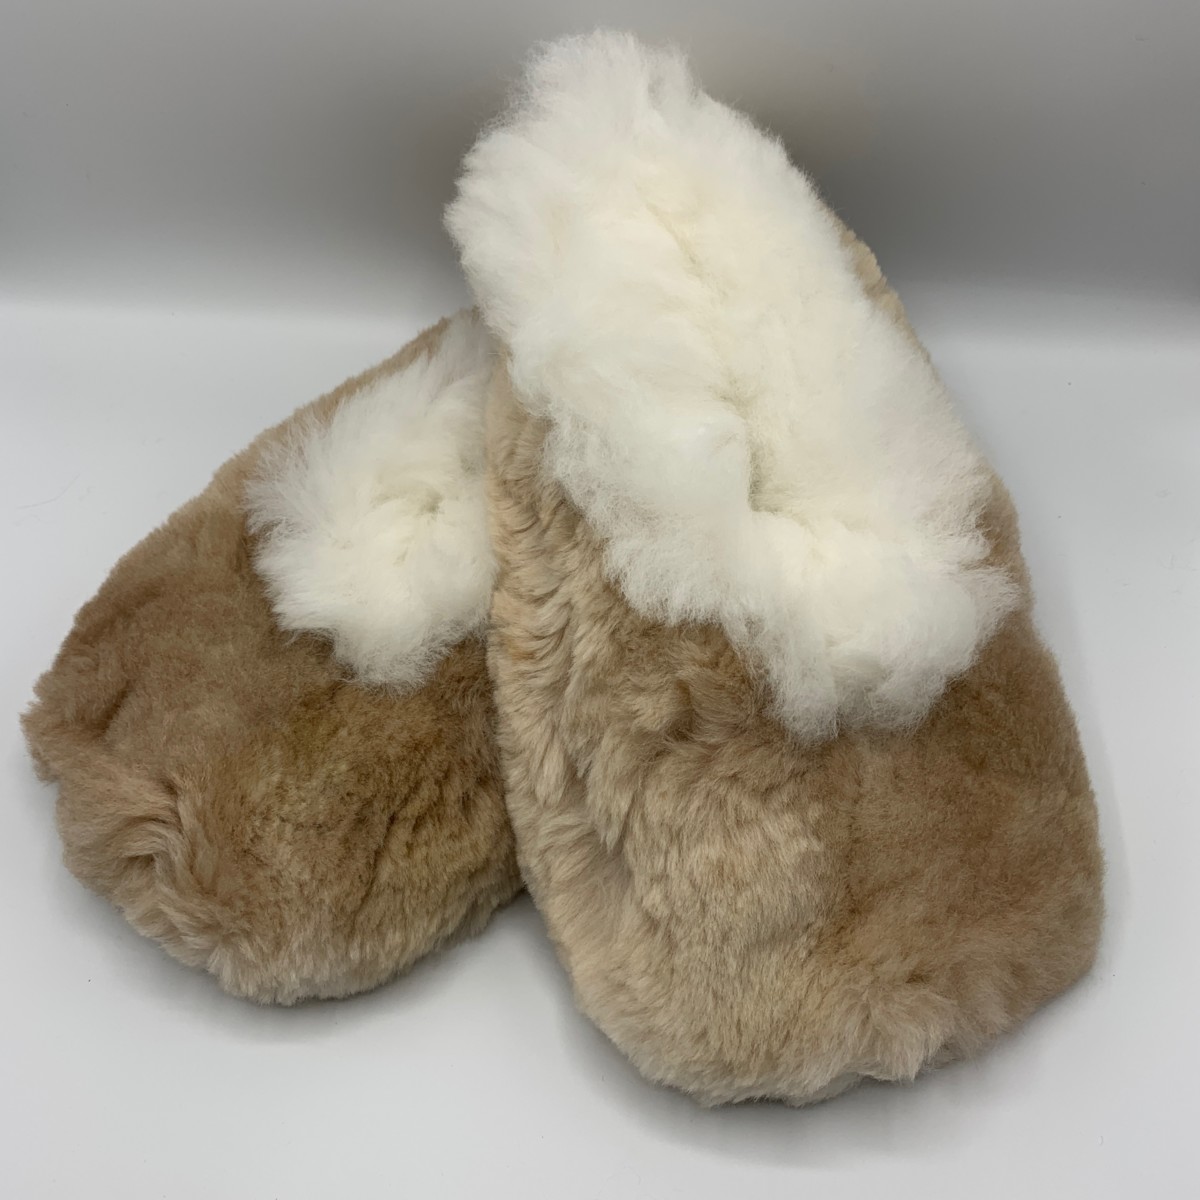 Alpaca Slippers Available for Purchase in Our Online Alpaca Store